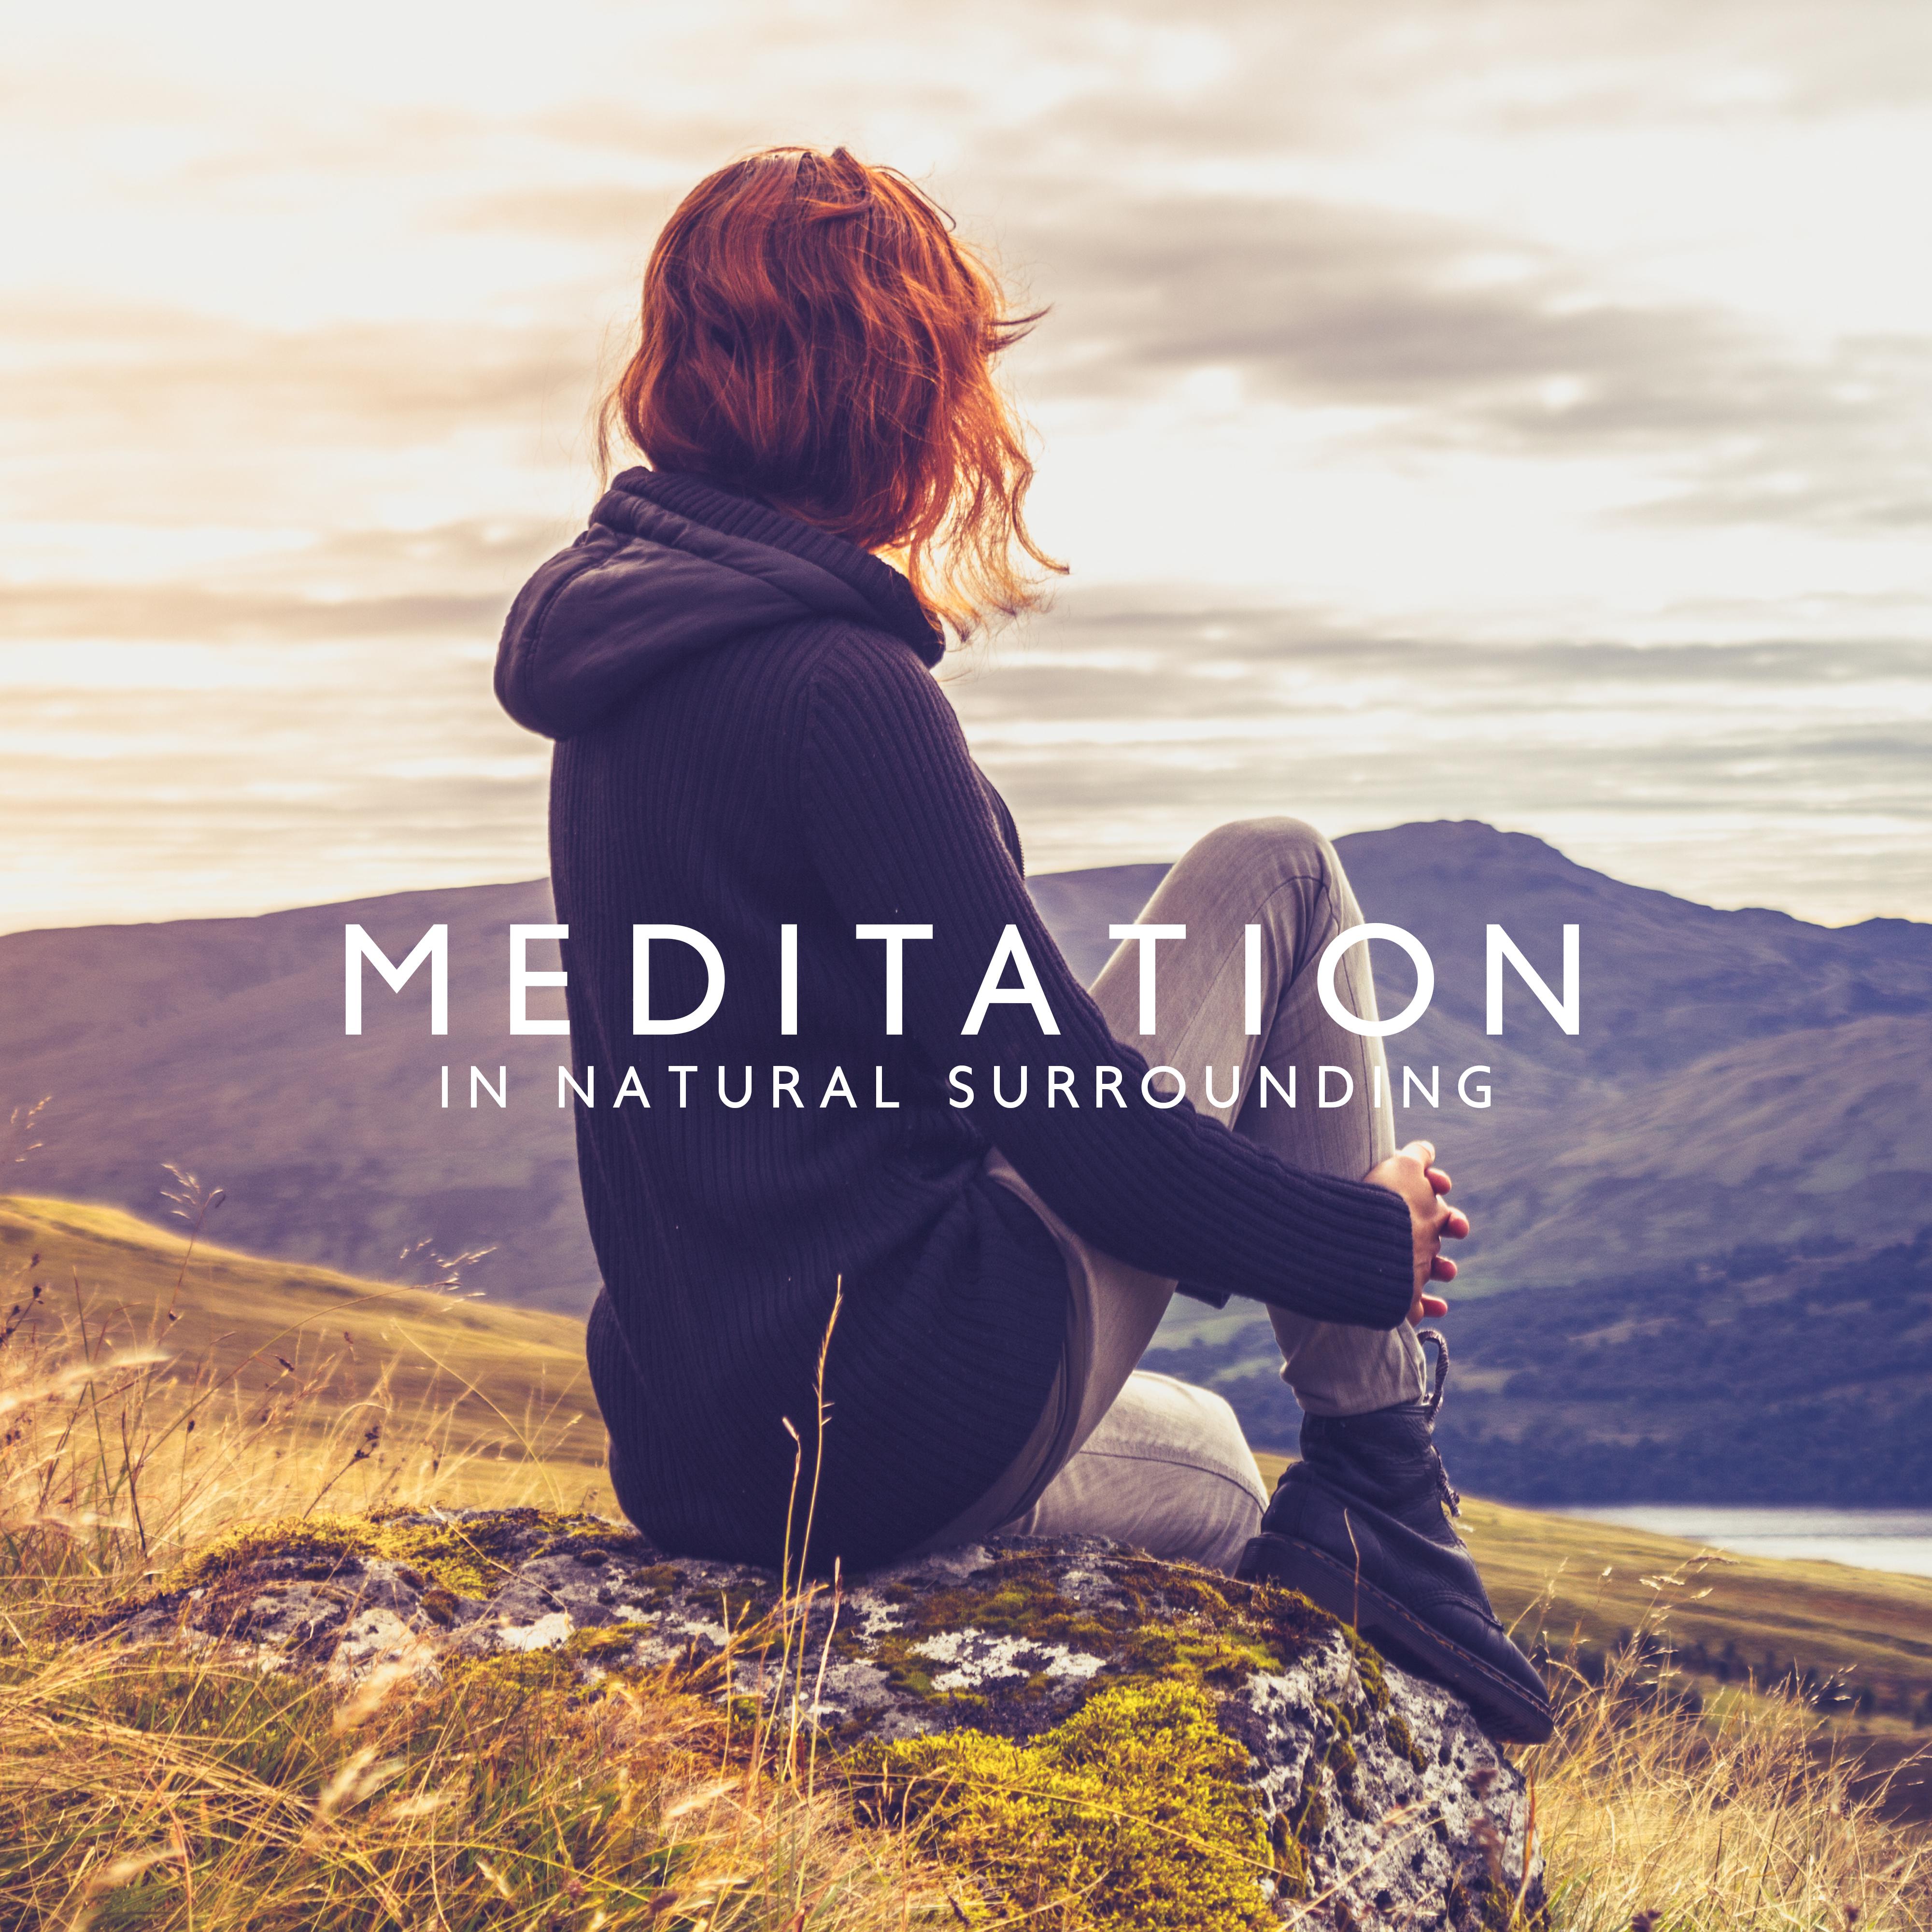 Meditation in Natural Surrounding: 15 best tracks for Meditation, Yoga, Zen and Stress Relief